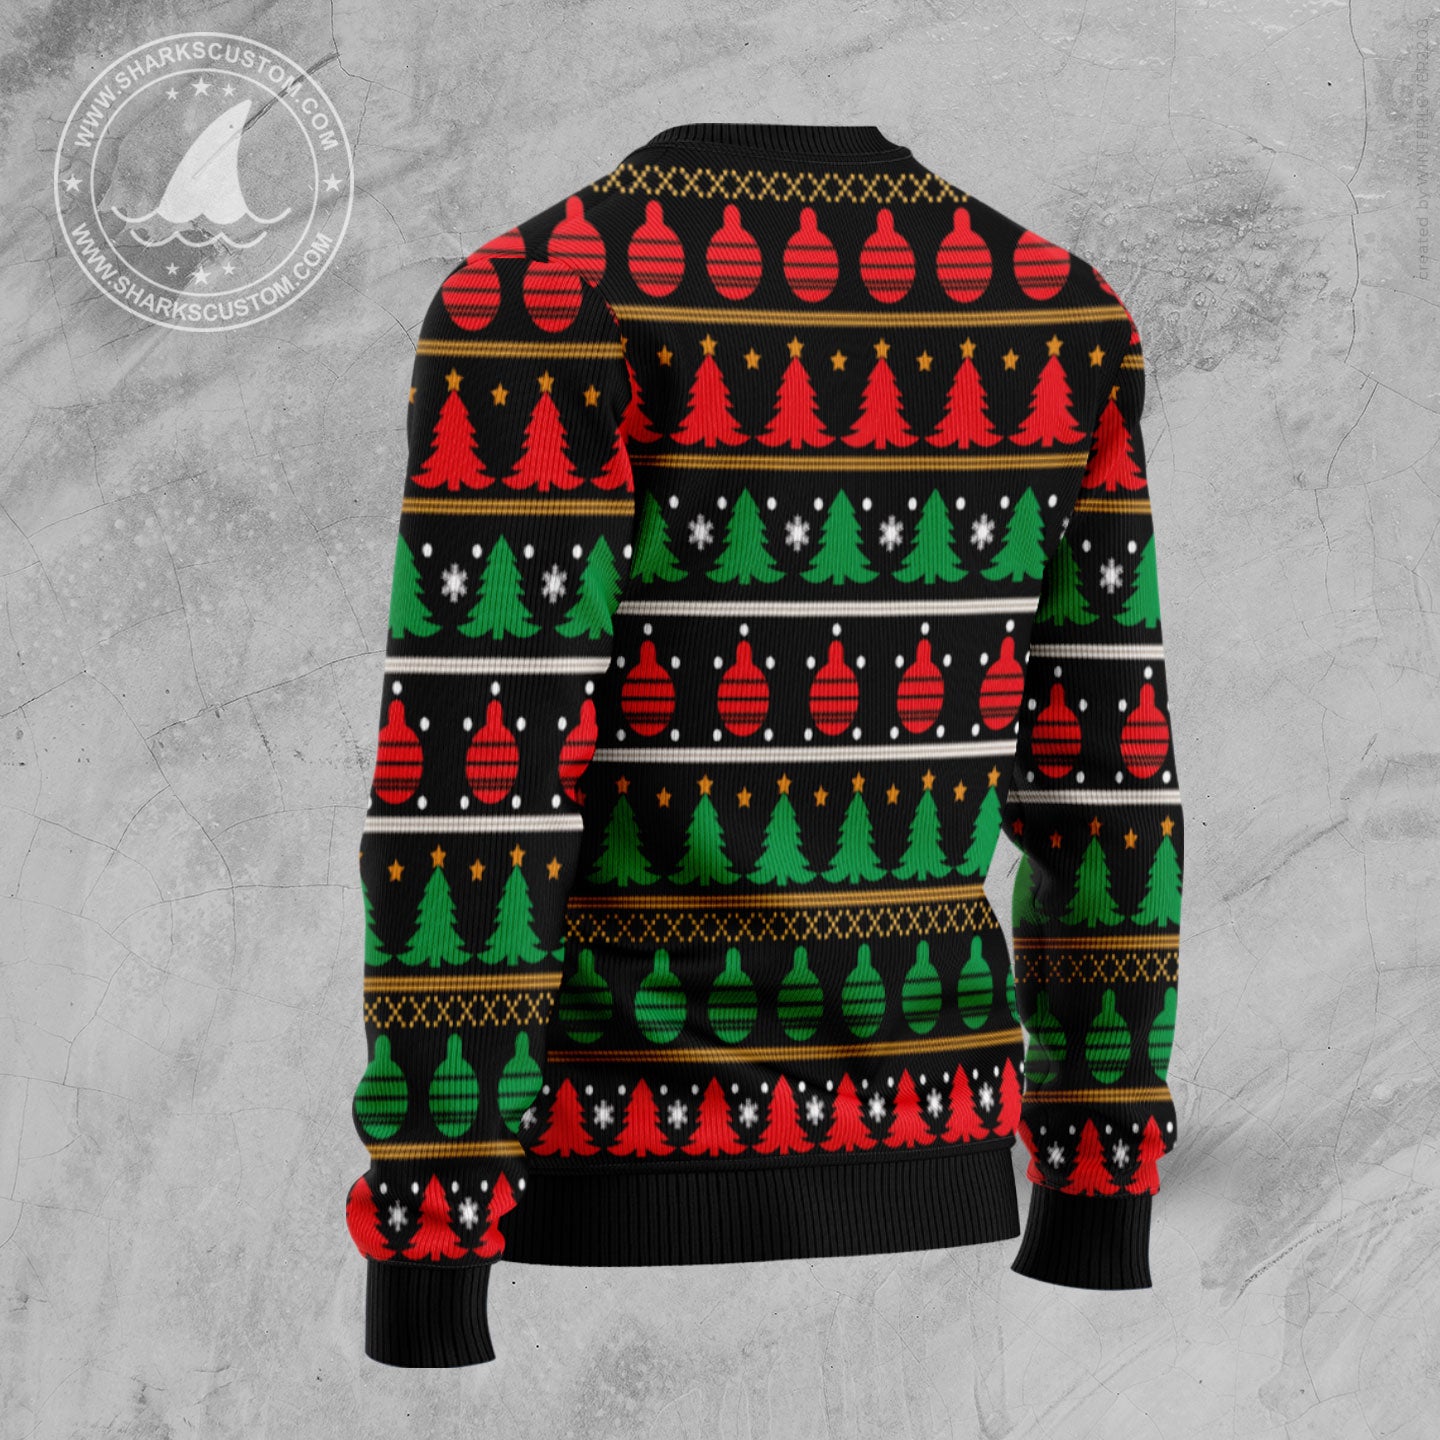 Awesome Cat TG5123 Ugly Christmas Sweater